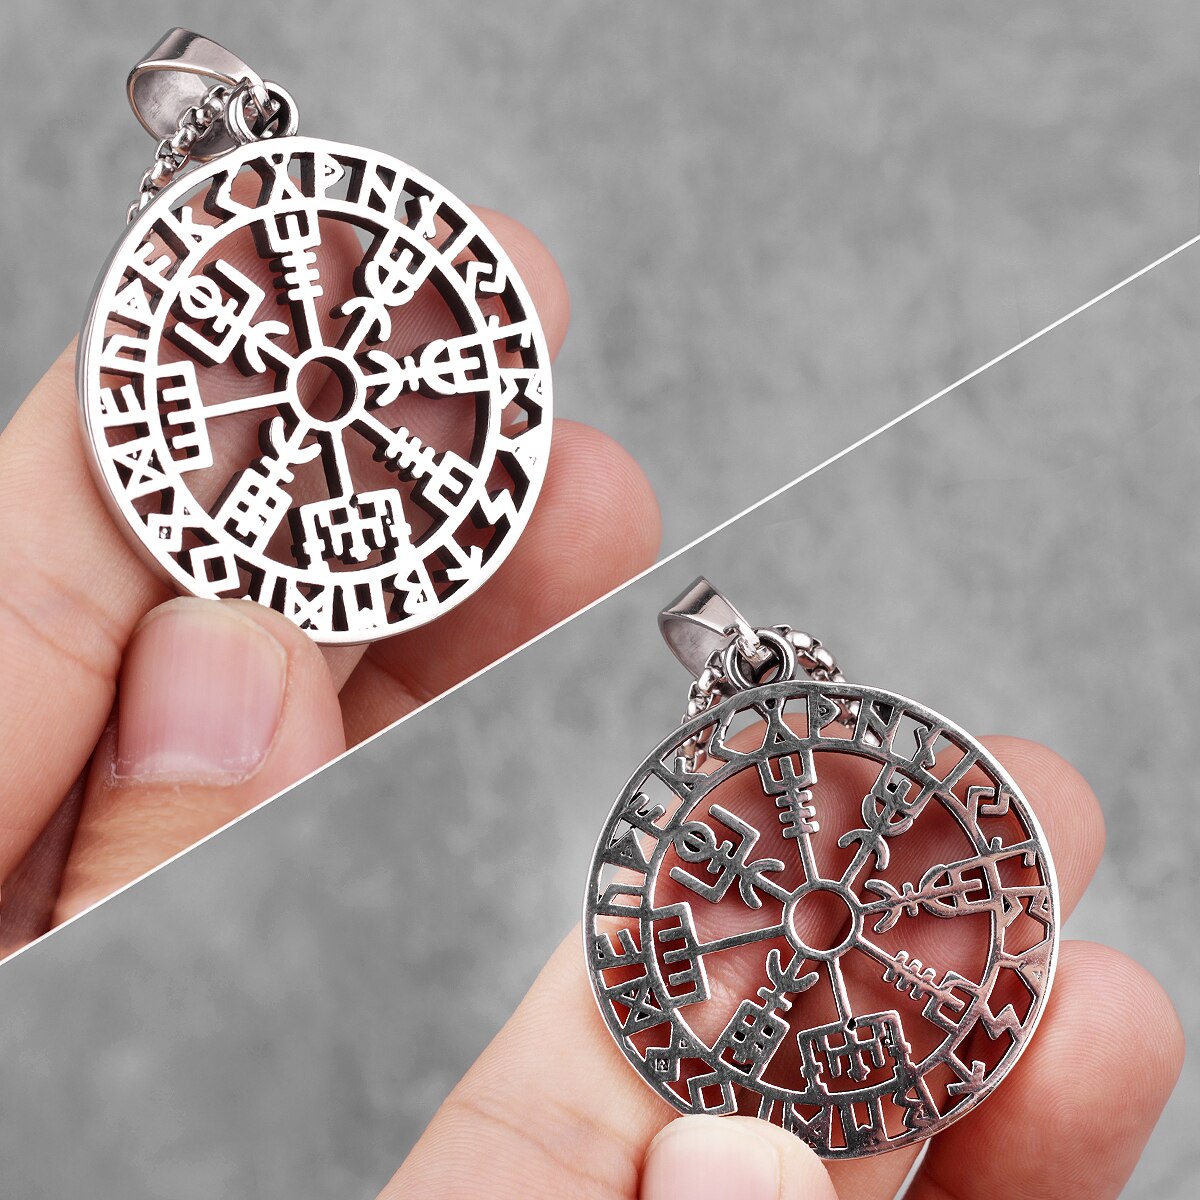 Stainless Steel Viking Pirate Odin Runes Men Necklaces Pendants Chain Punk for Boyfriend Male Jewelry Creativity Gift